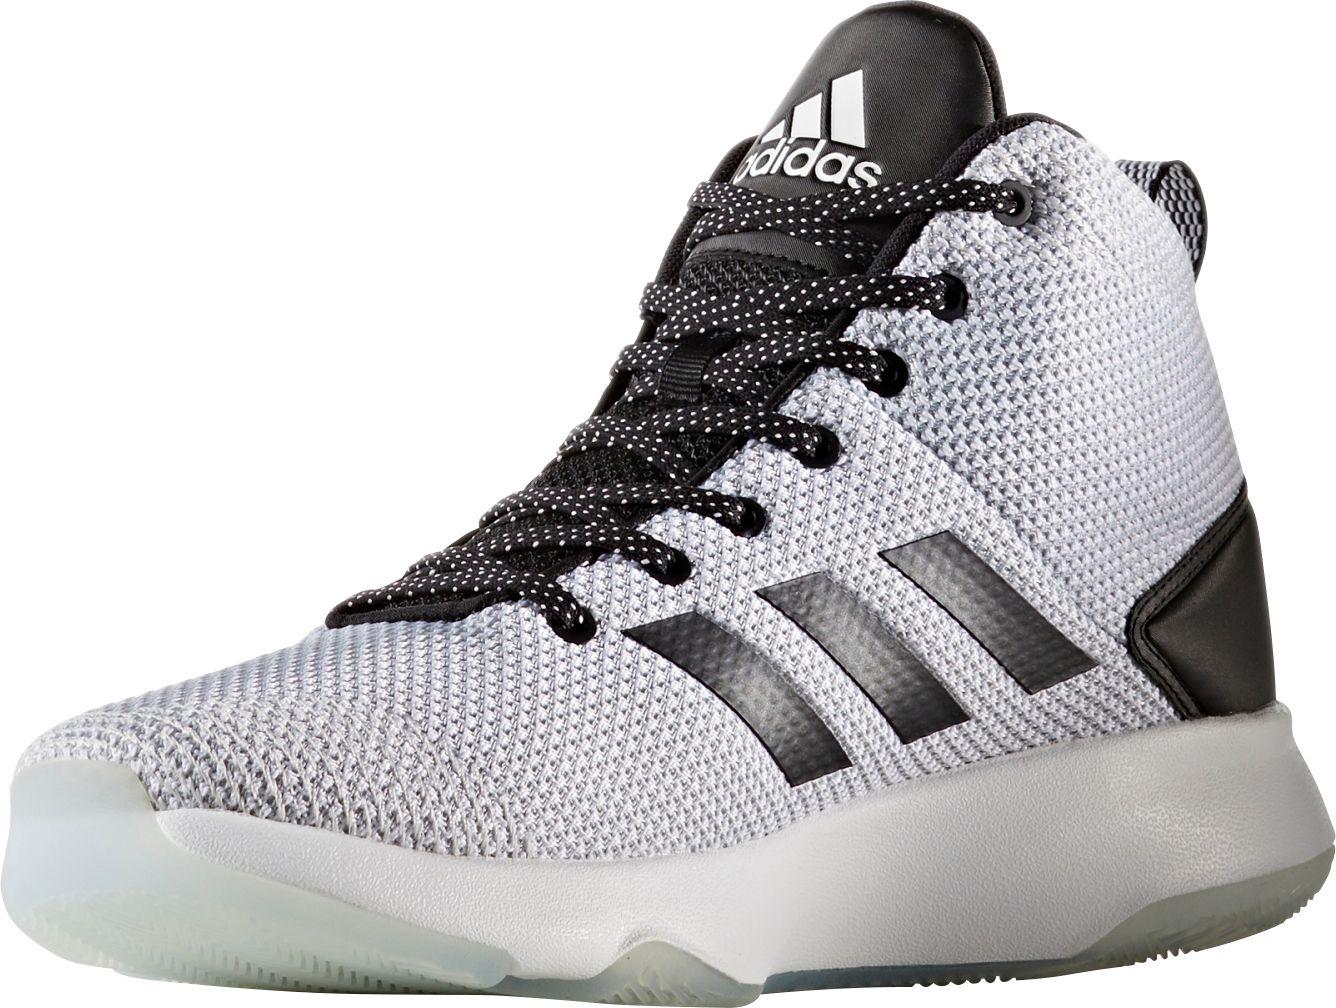 adidas Rubber Cloudfoam Executor Mid Basketball Shoes in White/Black (Black) for Men - Lyst